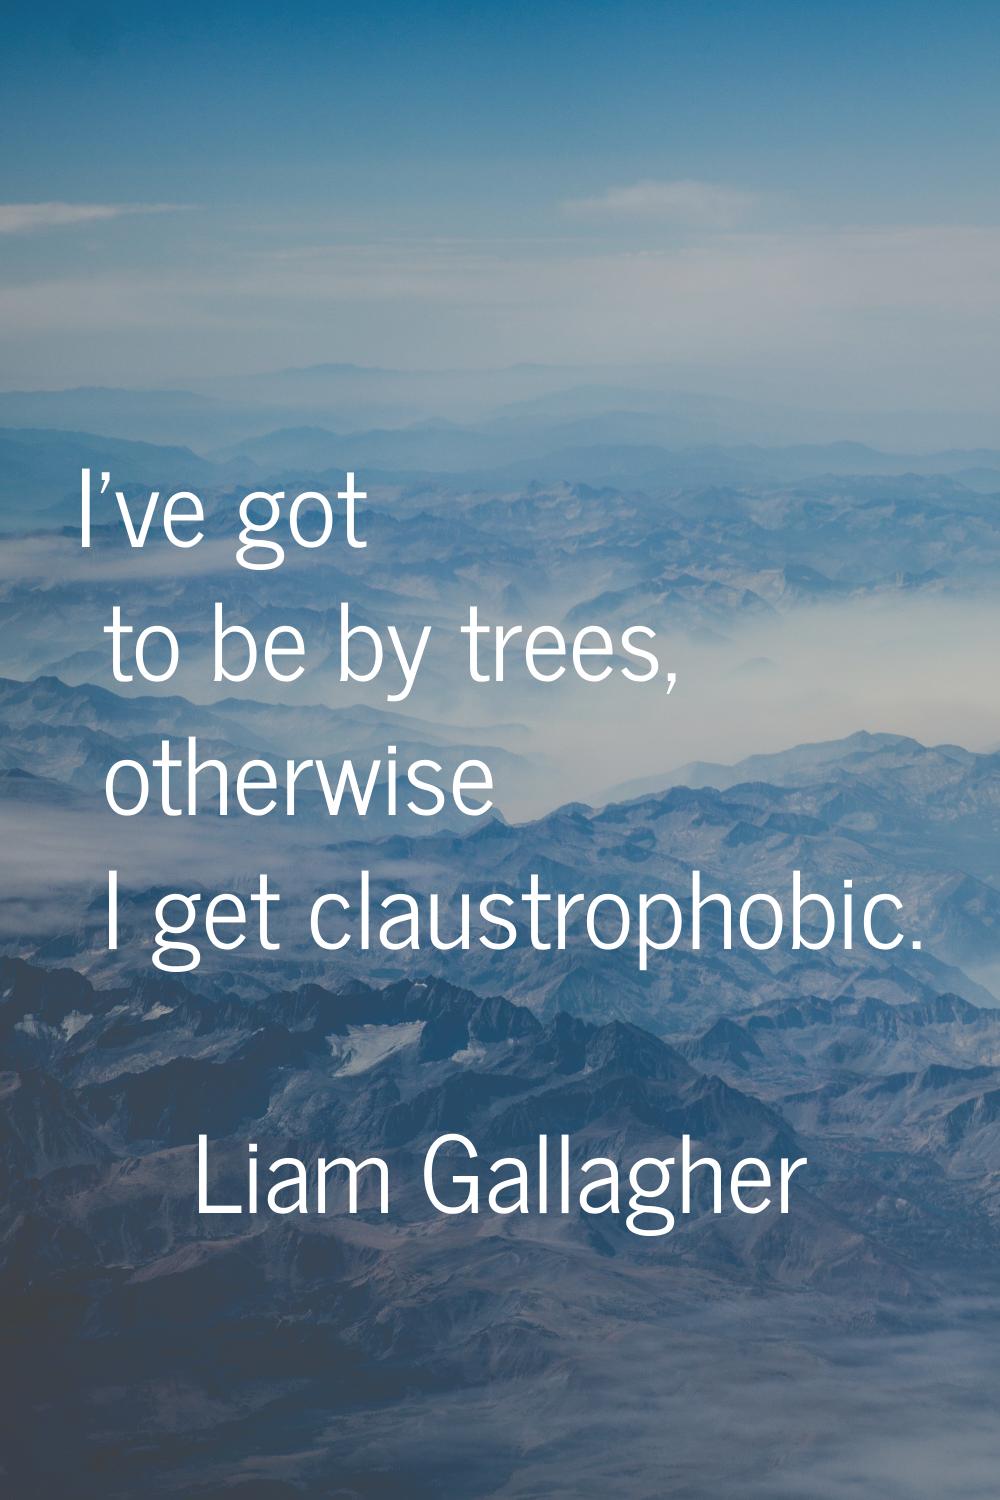 I've got to be by trees, otherwise I get claustrophobic.